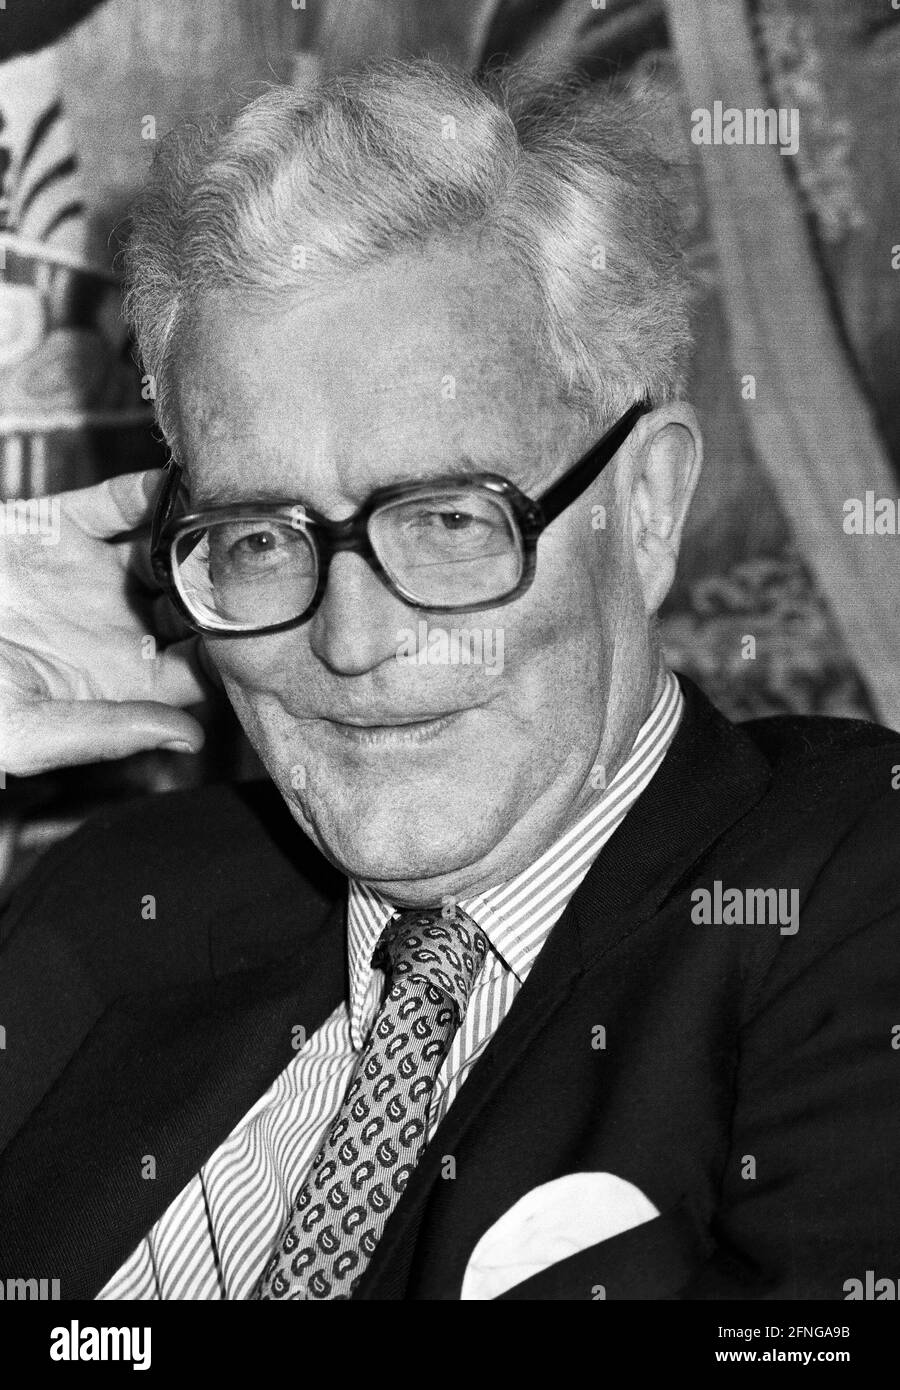 Germany, Bonn, 15.11.1989. Archive No: 10-51-14 Great Britain's Foreign Minister in Bonn Photo: Douglas Hurd, Foreign Secretary [automated translation] Stock Photo